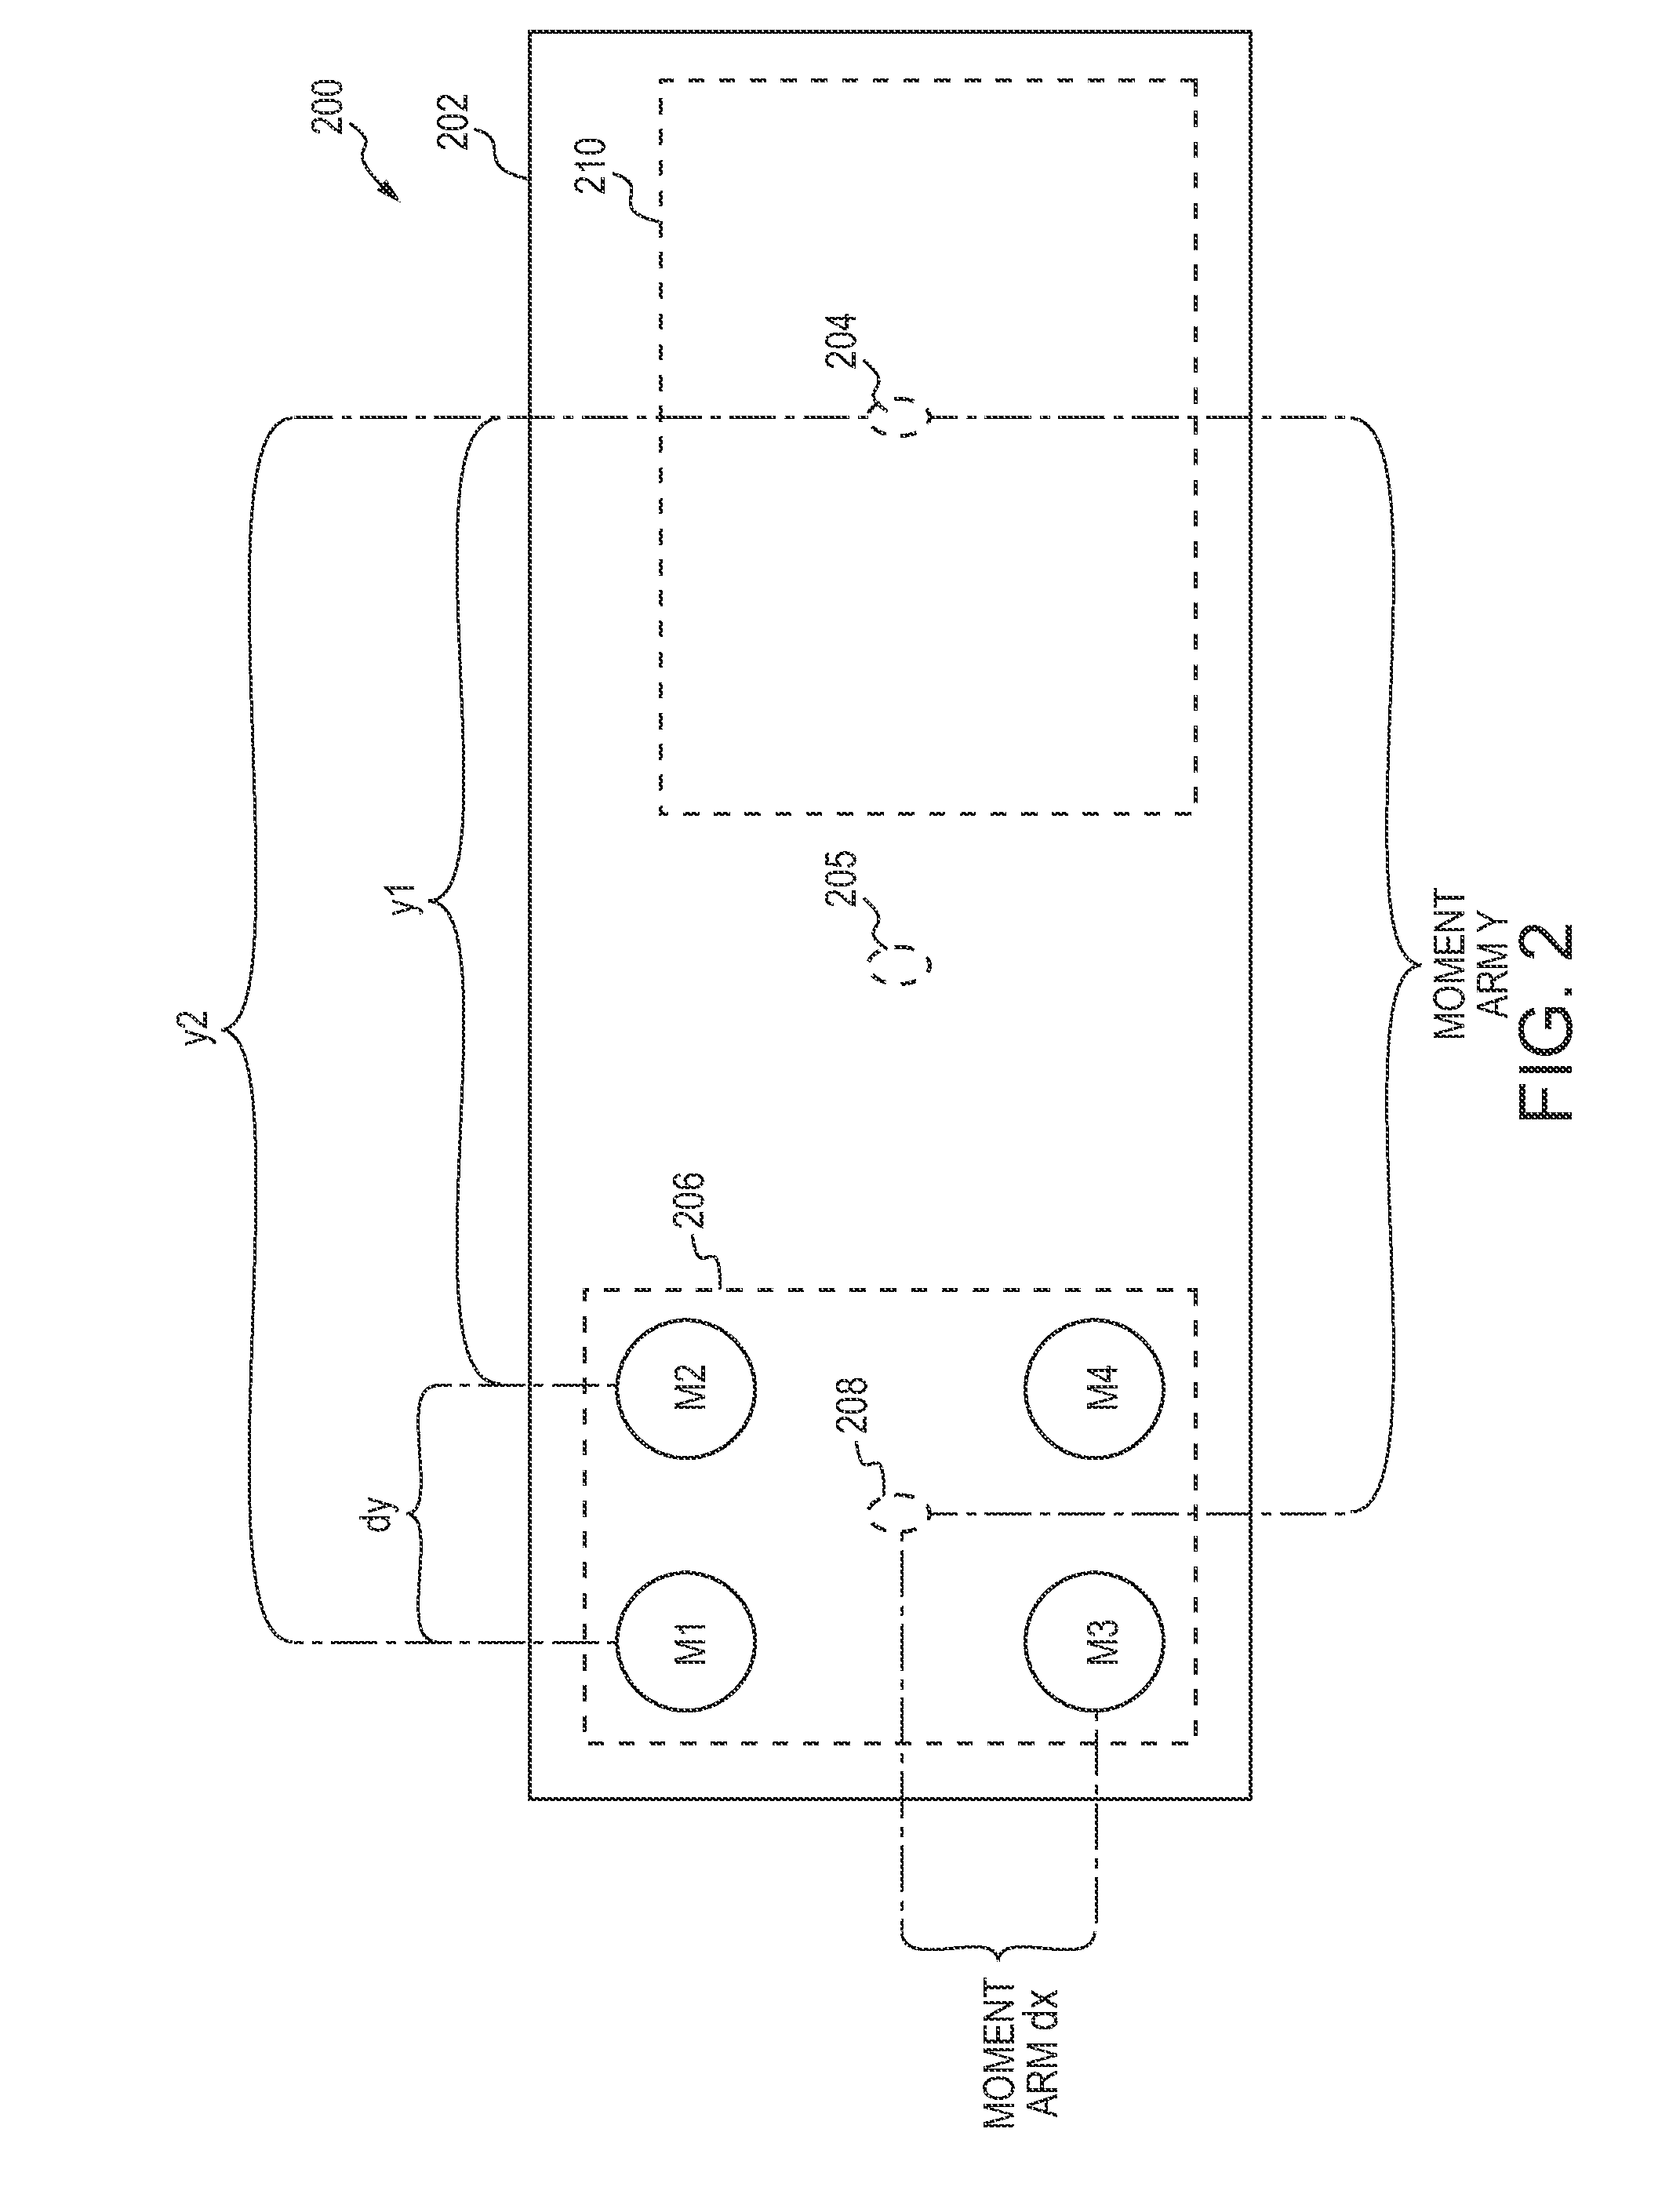 Method and system for biological signal analysis in a vehicle